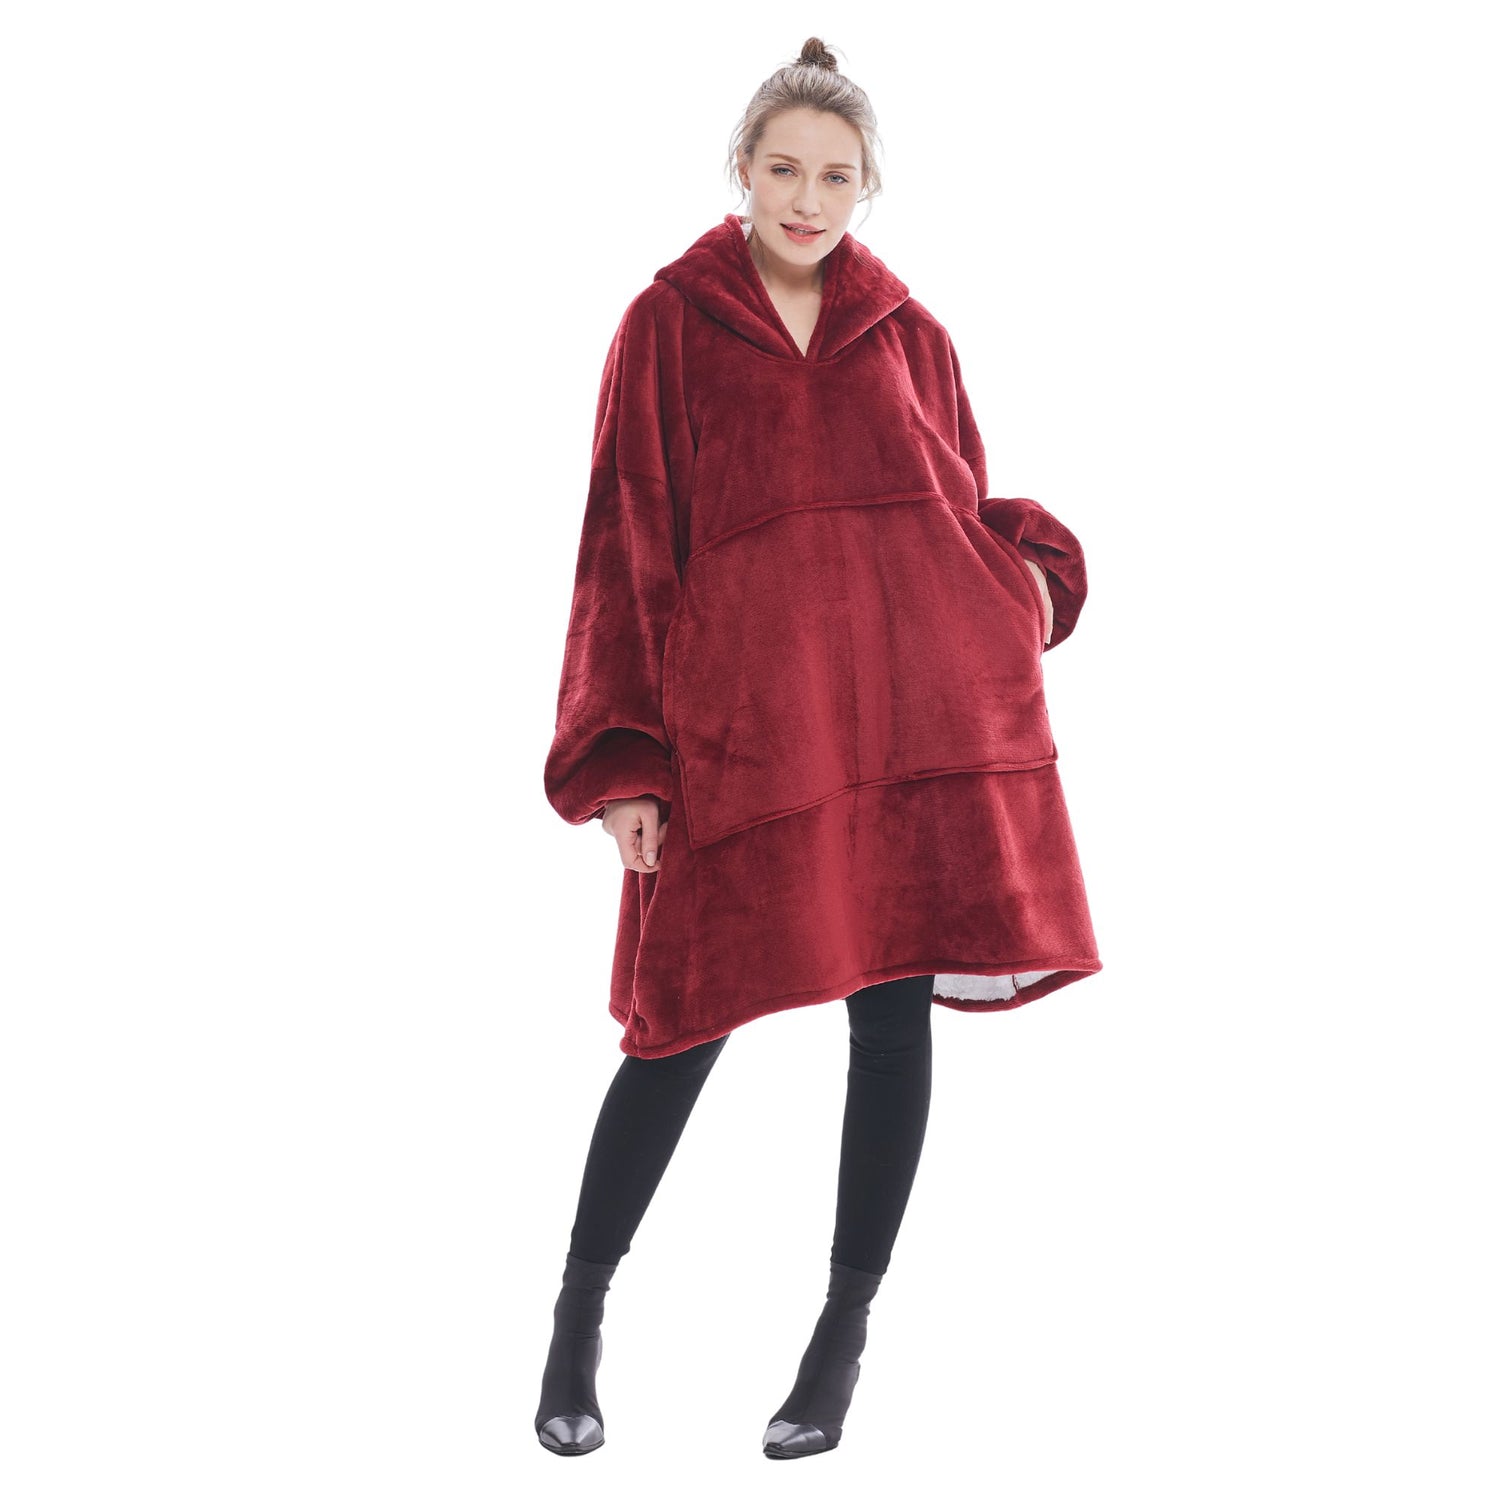 The Oversized Hoodie® red burgundy soft cosy comfy sweet 